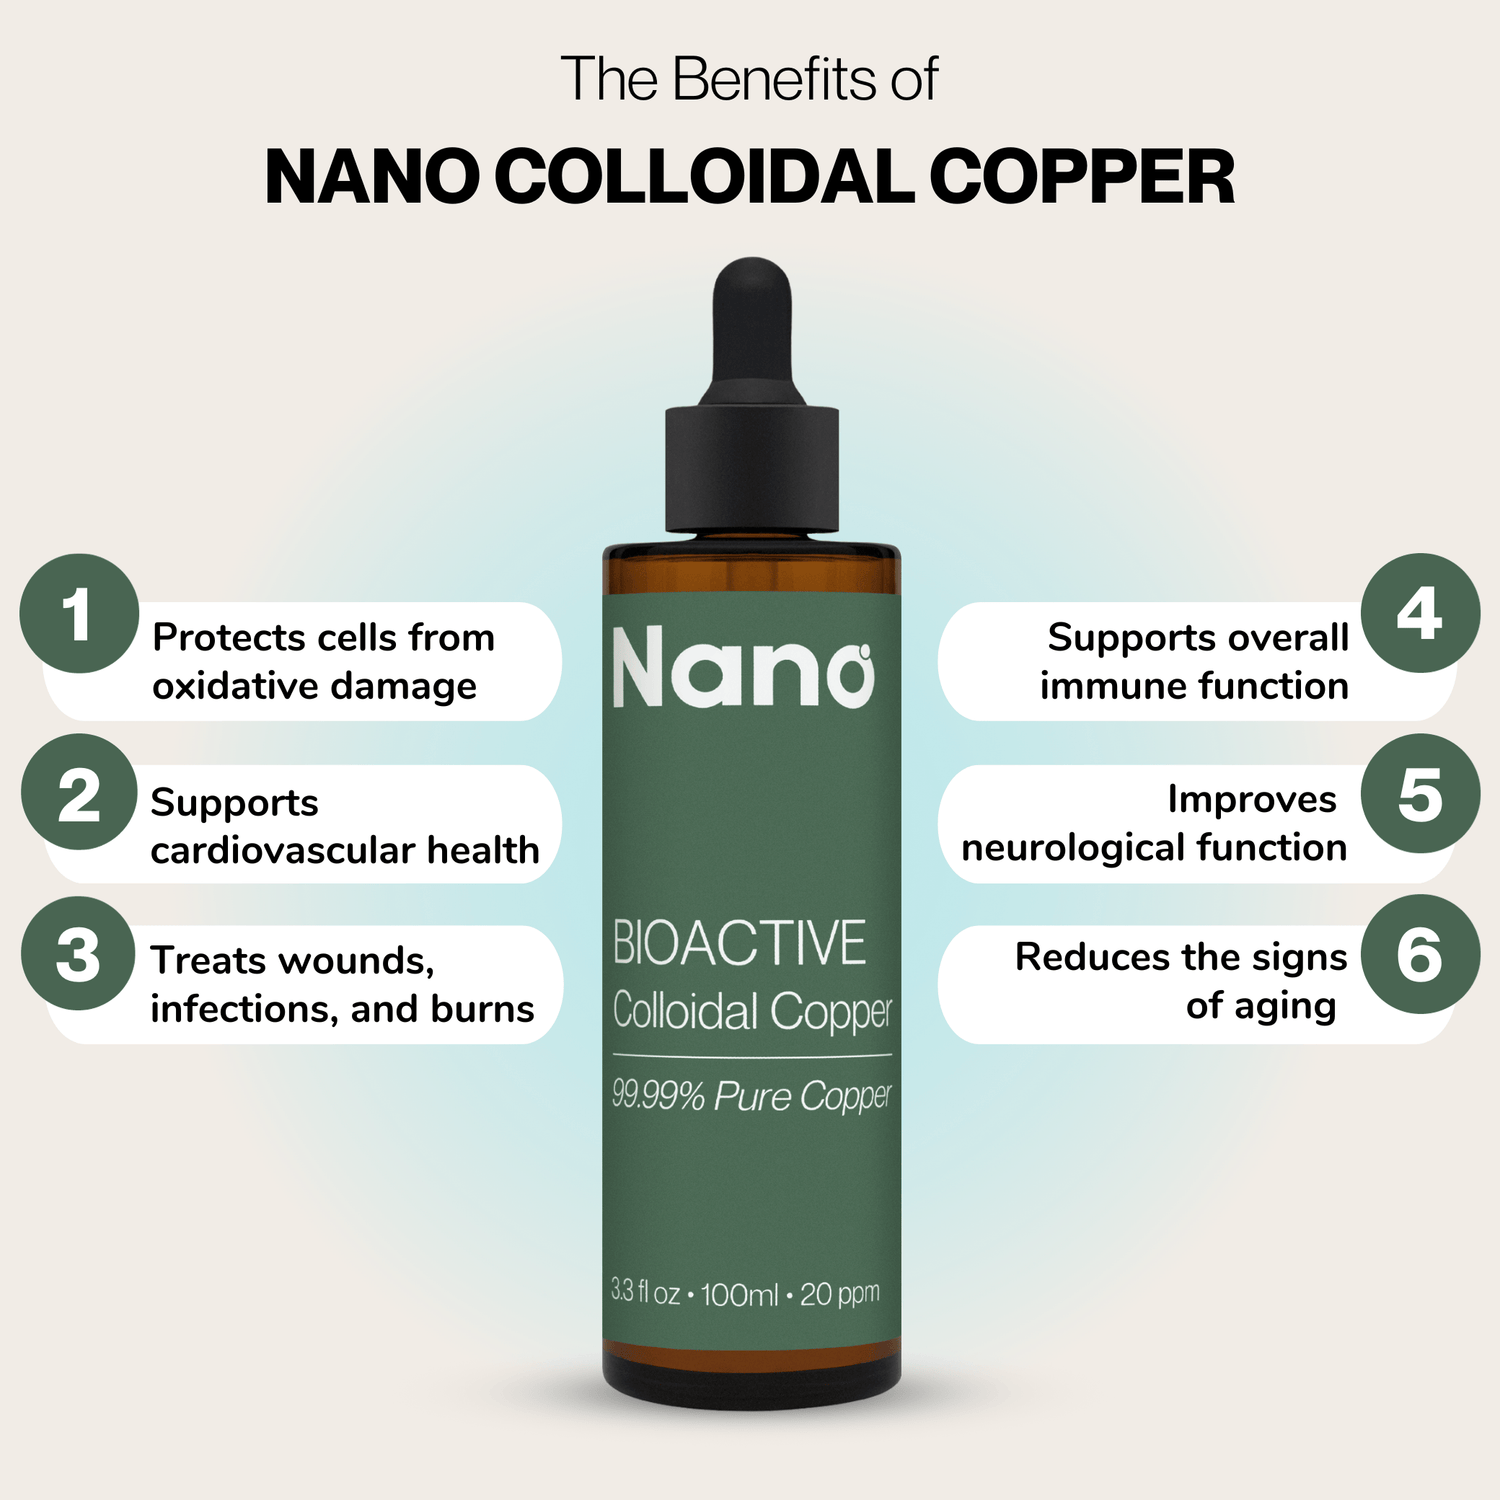 The benefits of Nano bioactive colloidal copper liquid health supplement. Protects cells from oxidative damage. Supports cardiovascular health. Treats wounds, infections and burns. Supports overall immune function. Improves neurological function. Reduces the signs of aging